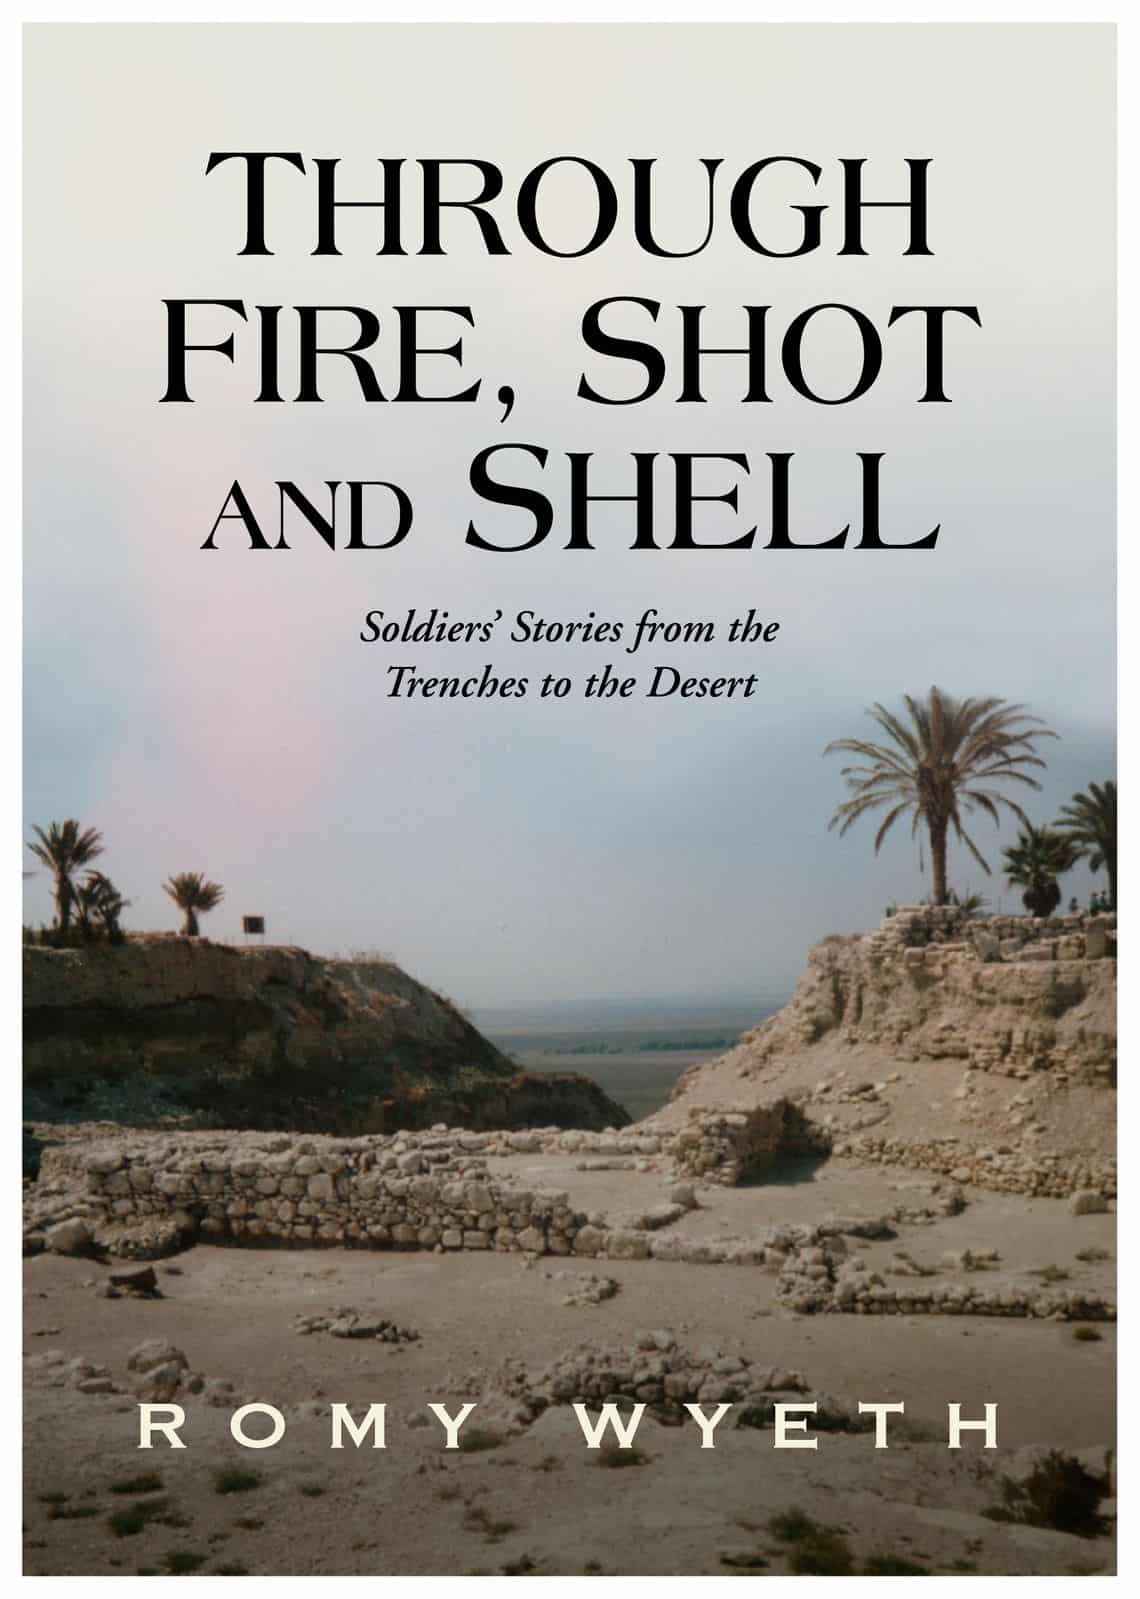 Through Fire, Shot and Shell